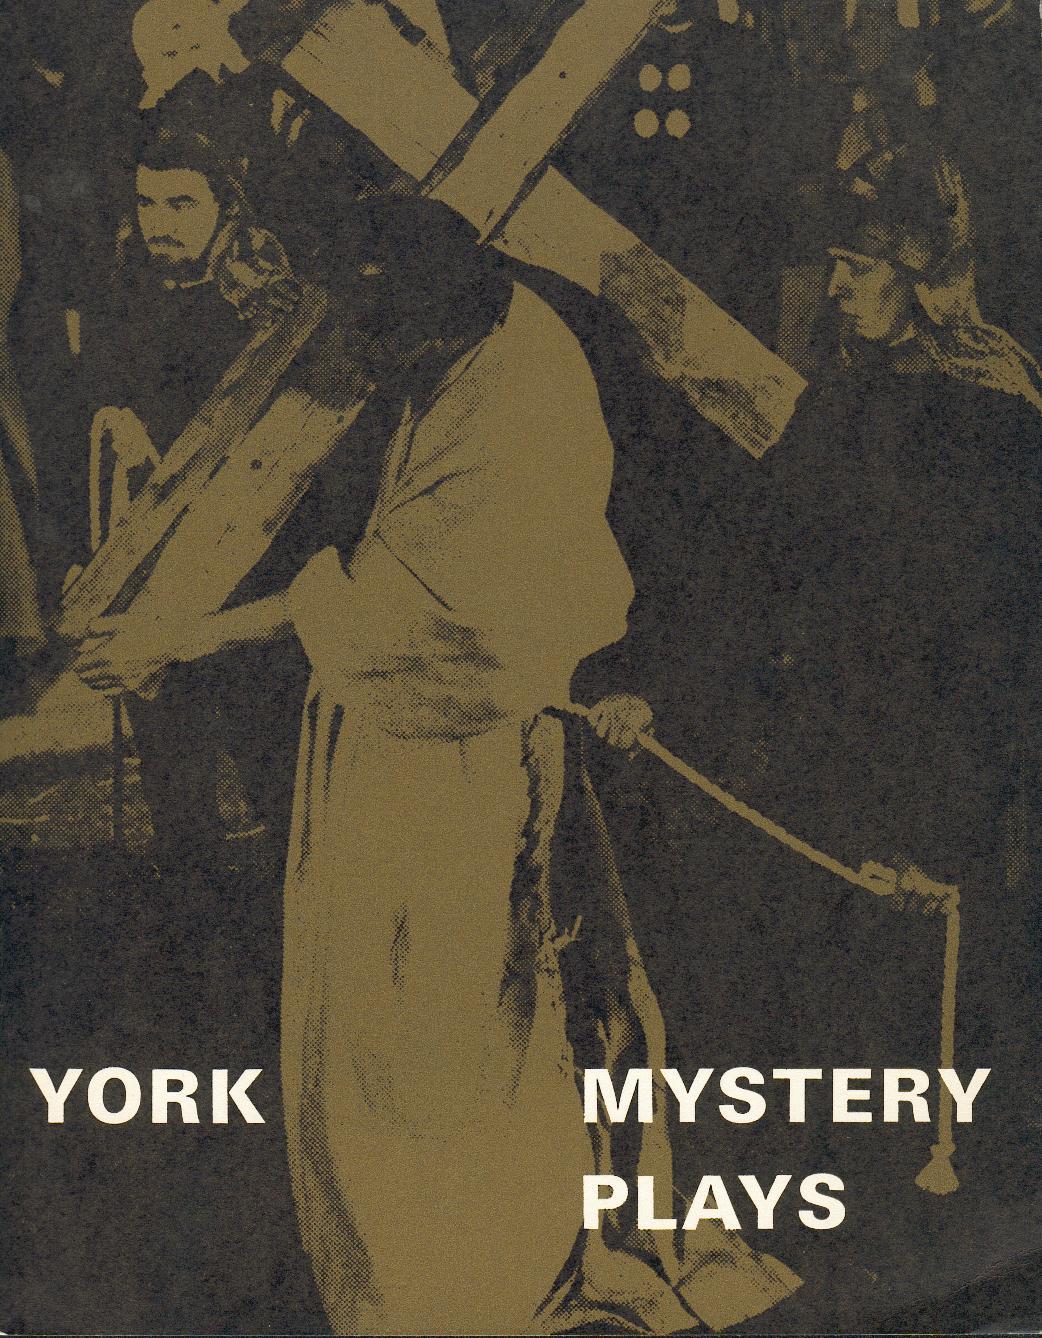 1969 front cover